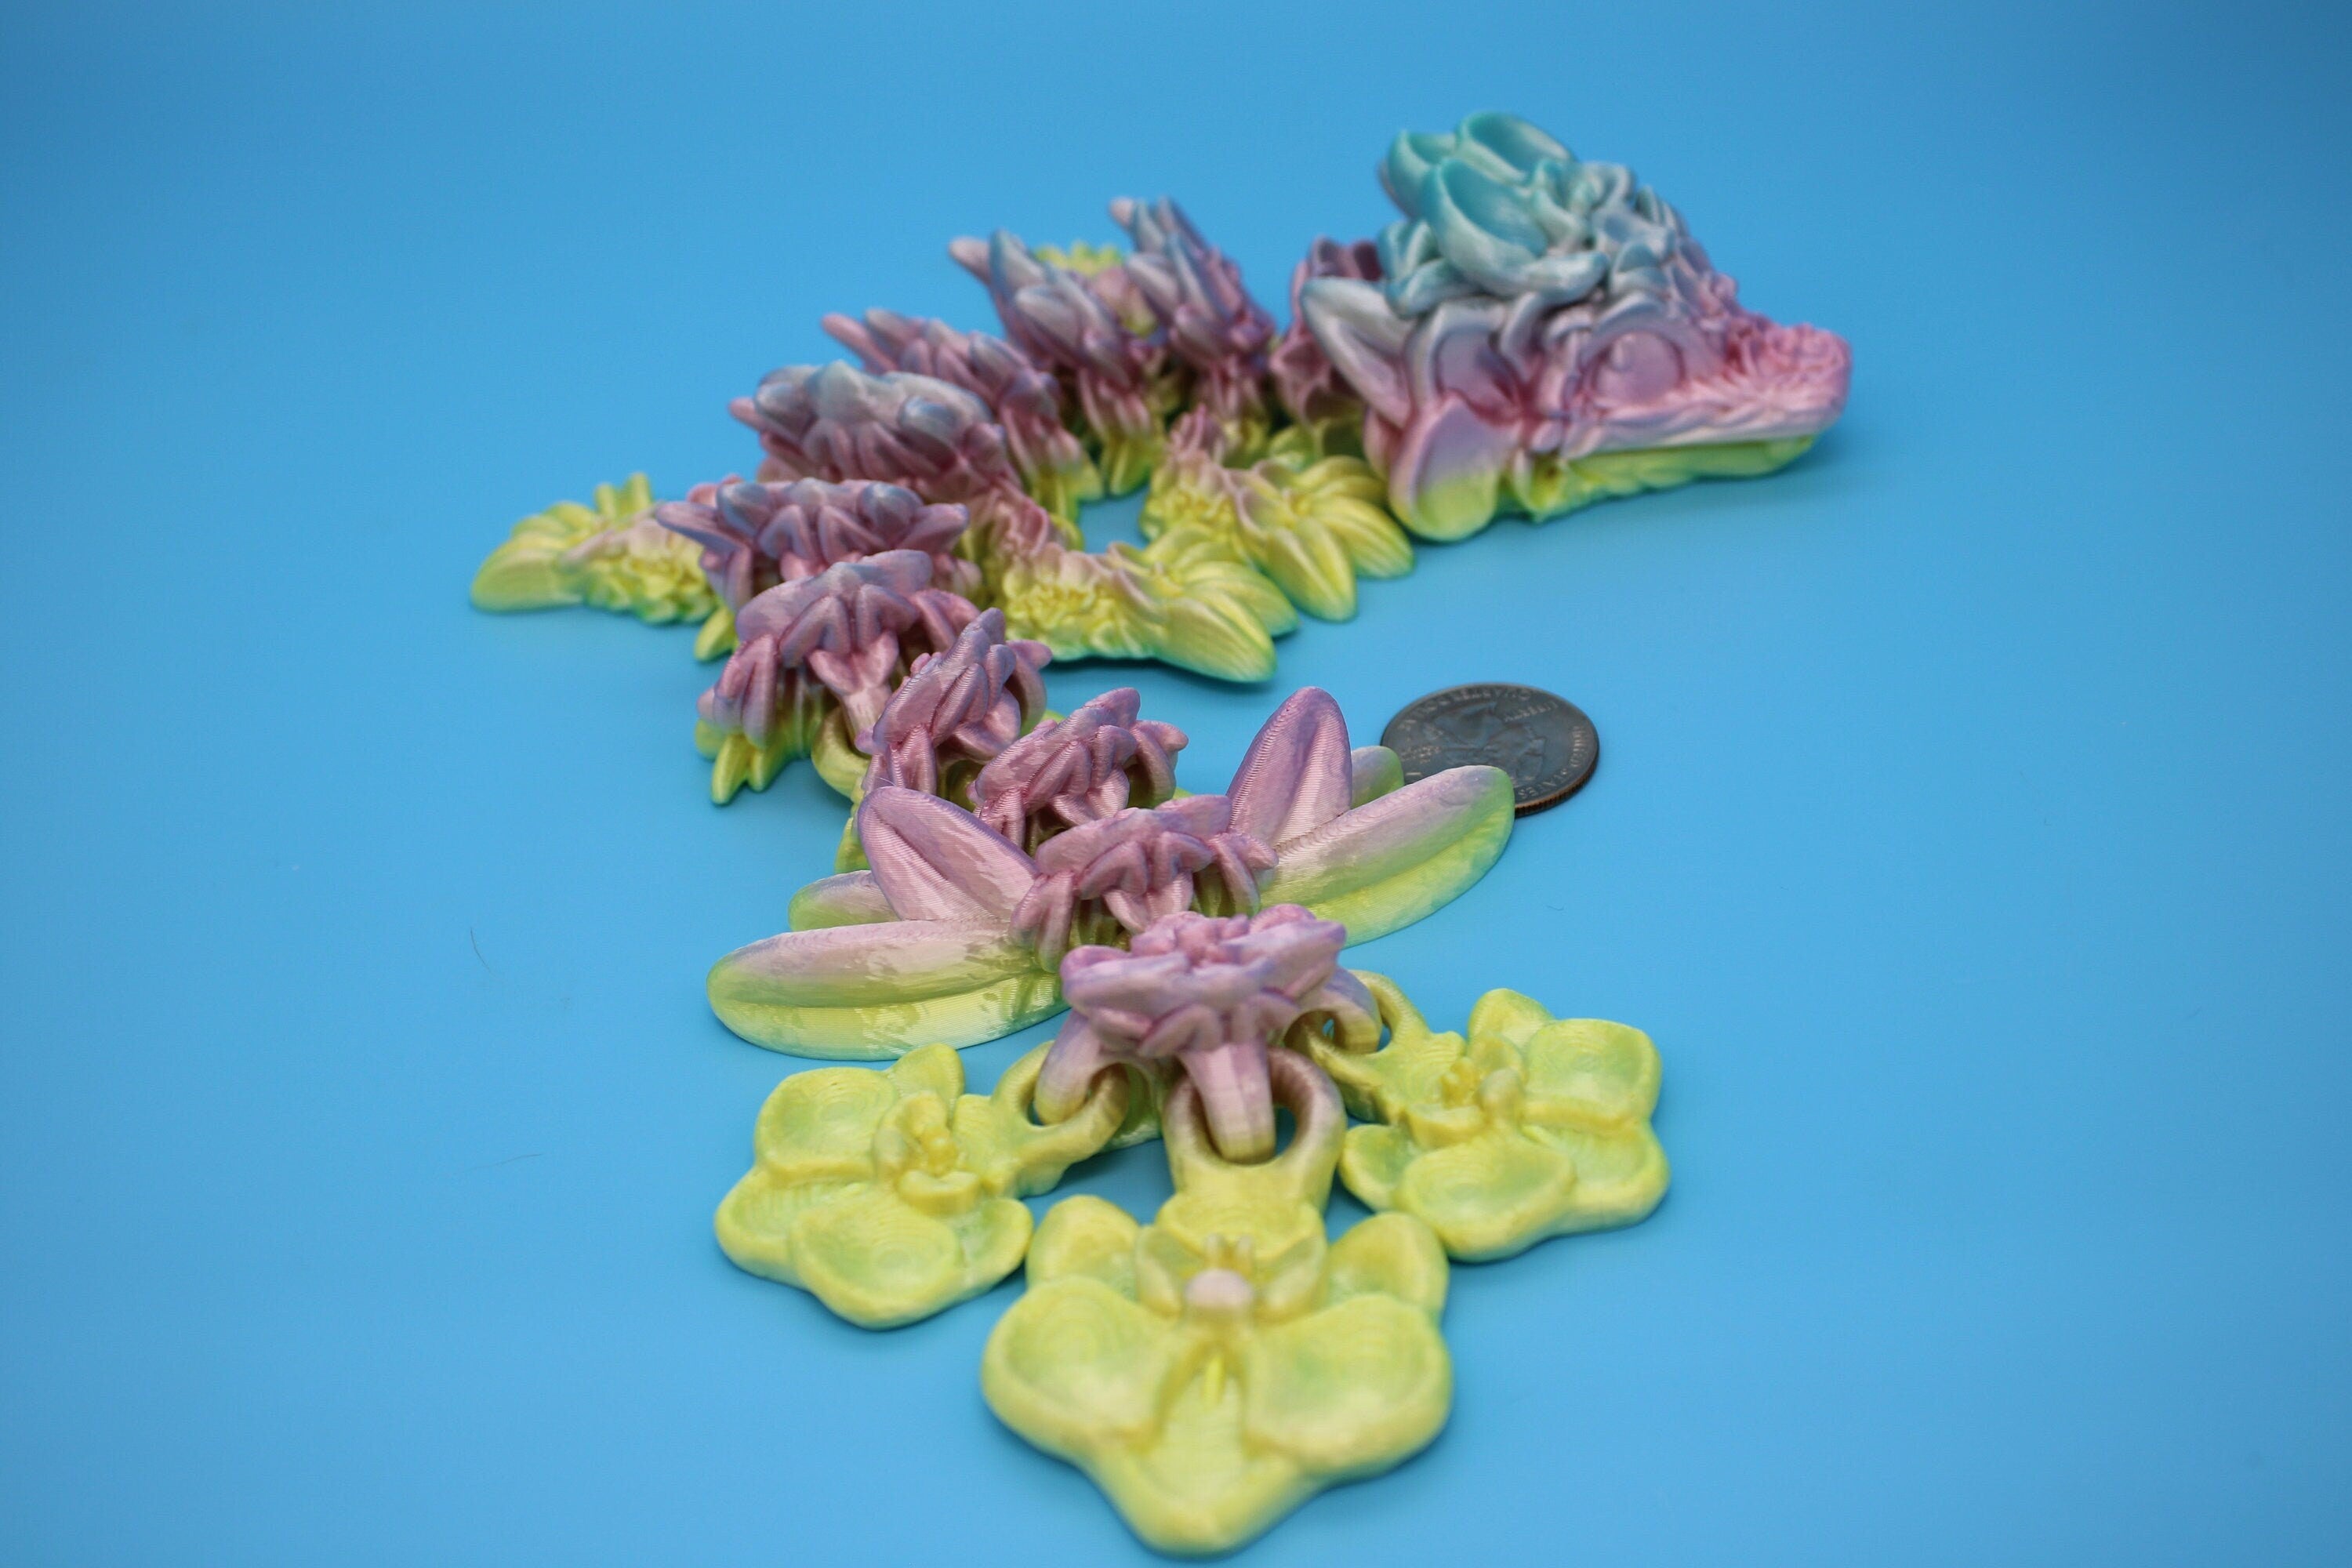 Baby Multi Color Orchid Dragon | 3D Printed Articulating Dragon | Flexi Toy | Adult Fidget Toy | Dragon Buddy ready for you! 12.5 inch.